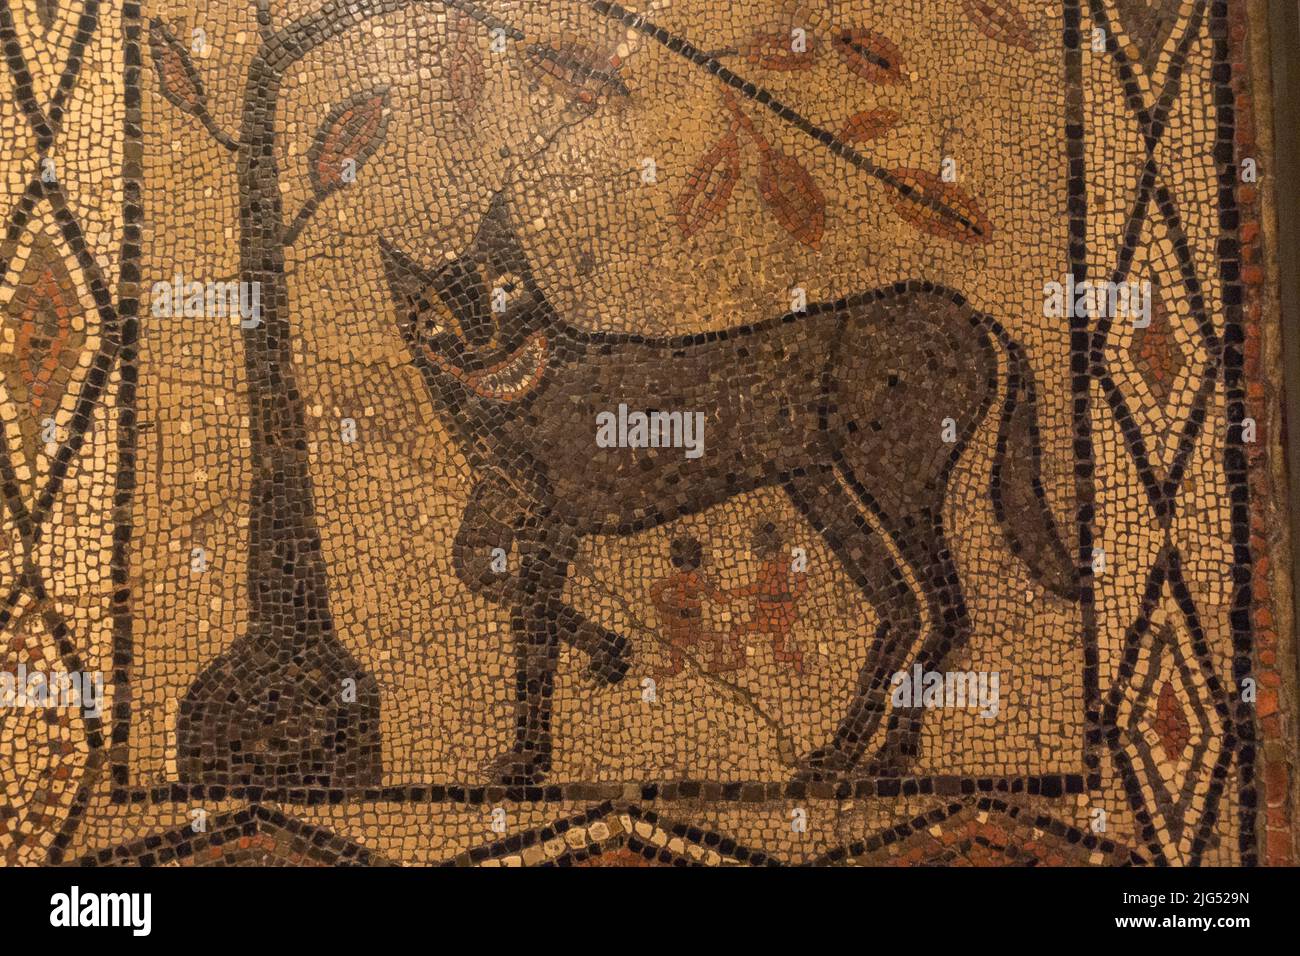 'The Wolf and Twins' mosaic, Roman tiling from Aldborough, (c300-400AD) on display in the UK. Stock Photo